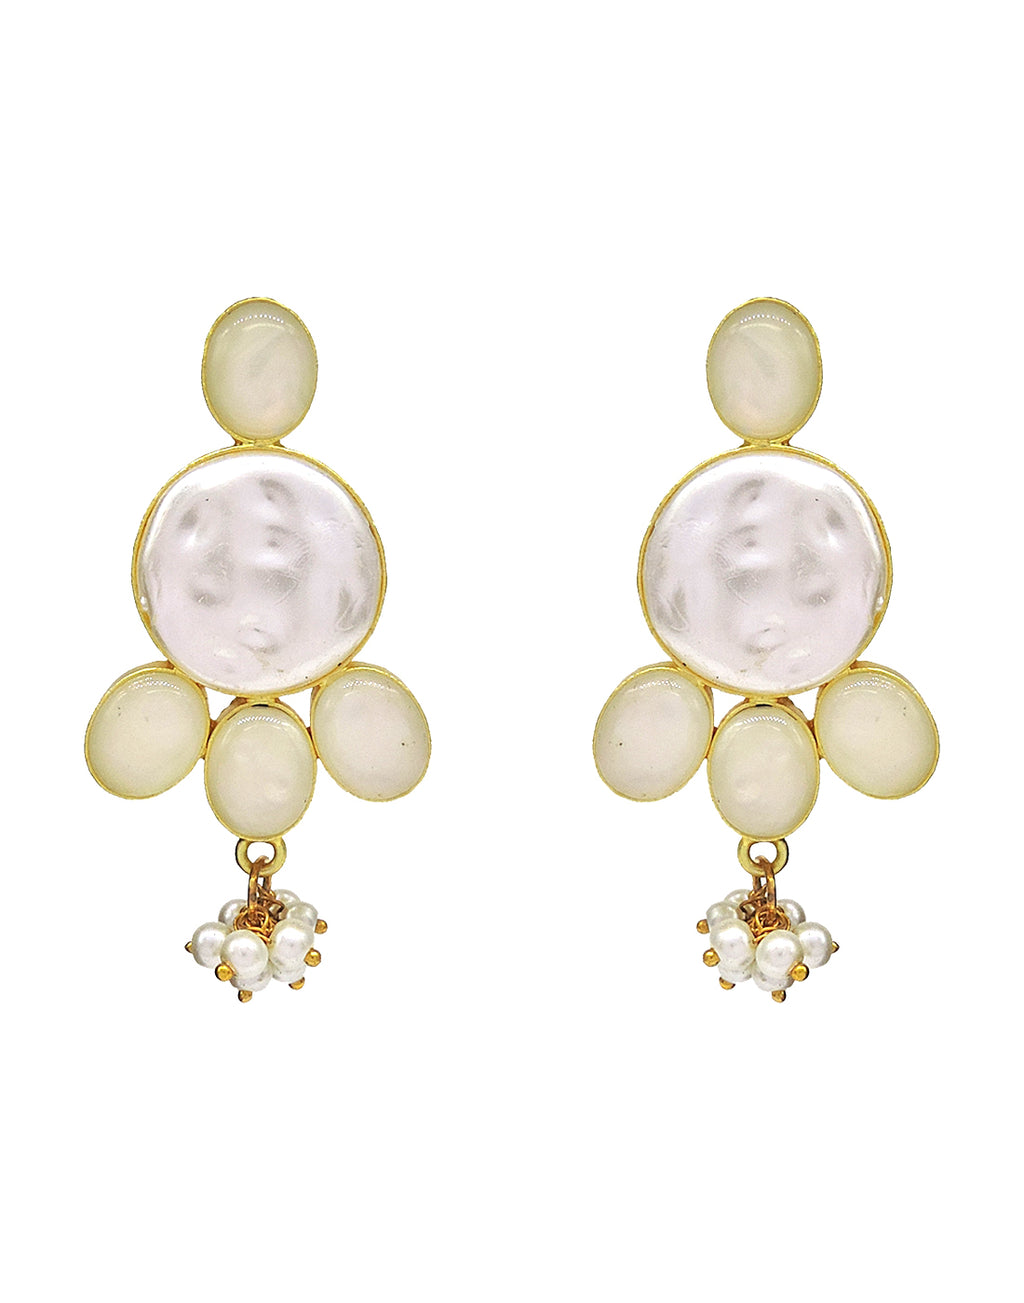 Baroque Pearl & Shell Earrings - Statement Earrings - Gold-Plated & Hypoallergenic Jewellery - Made in India - Dubai Jewellery - Dori